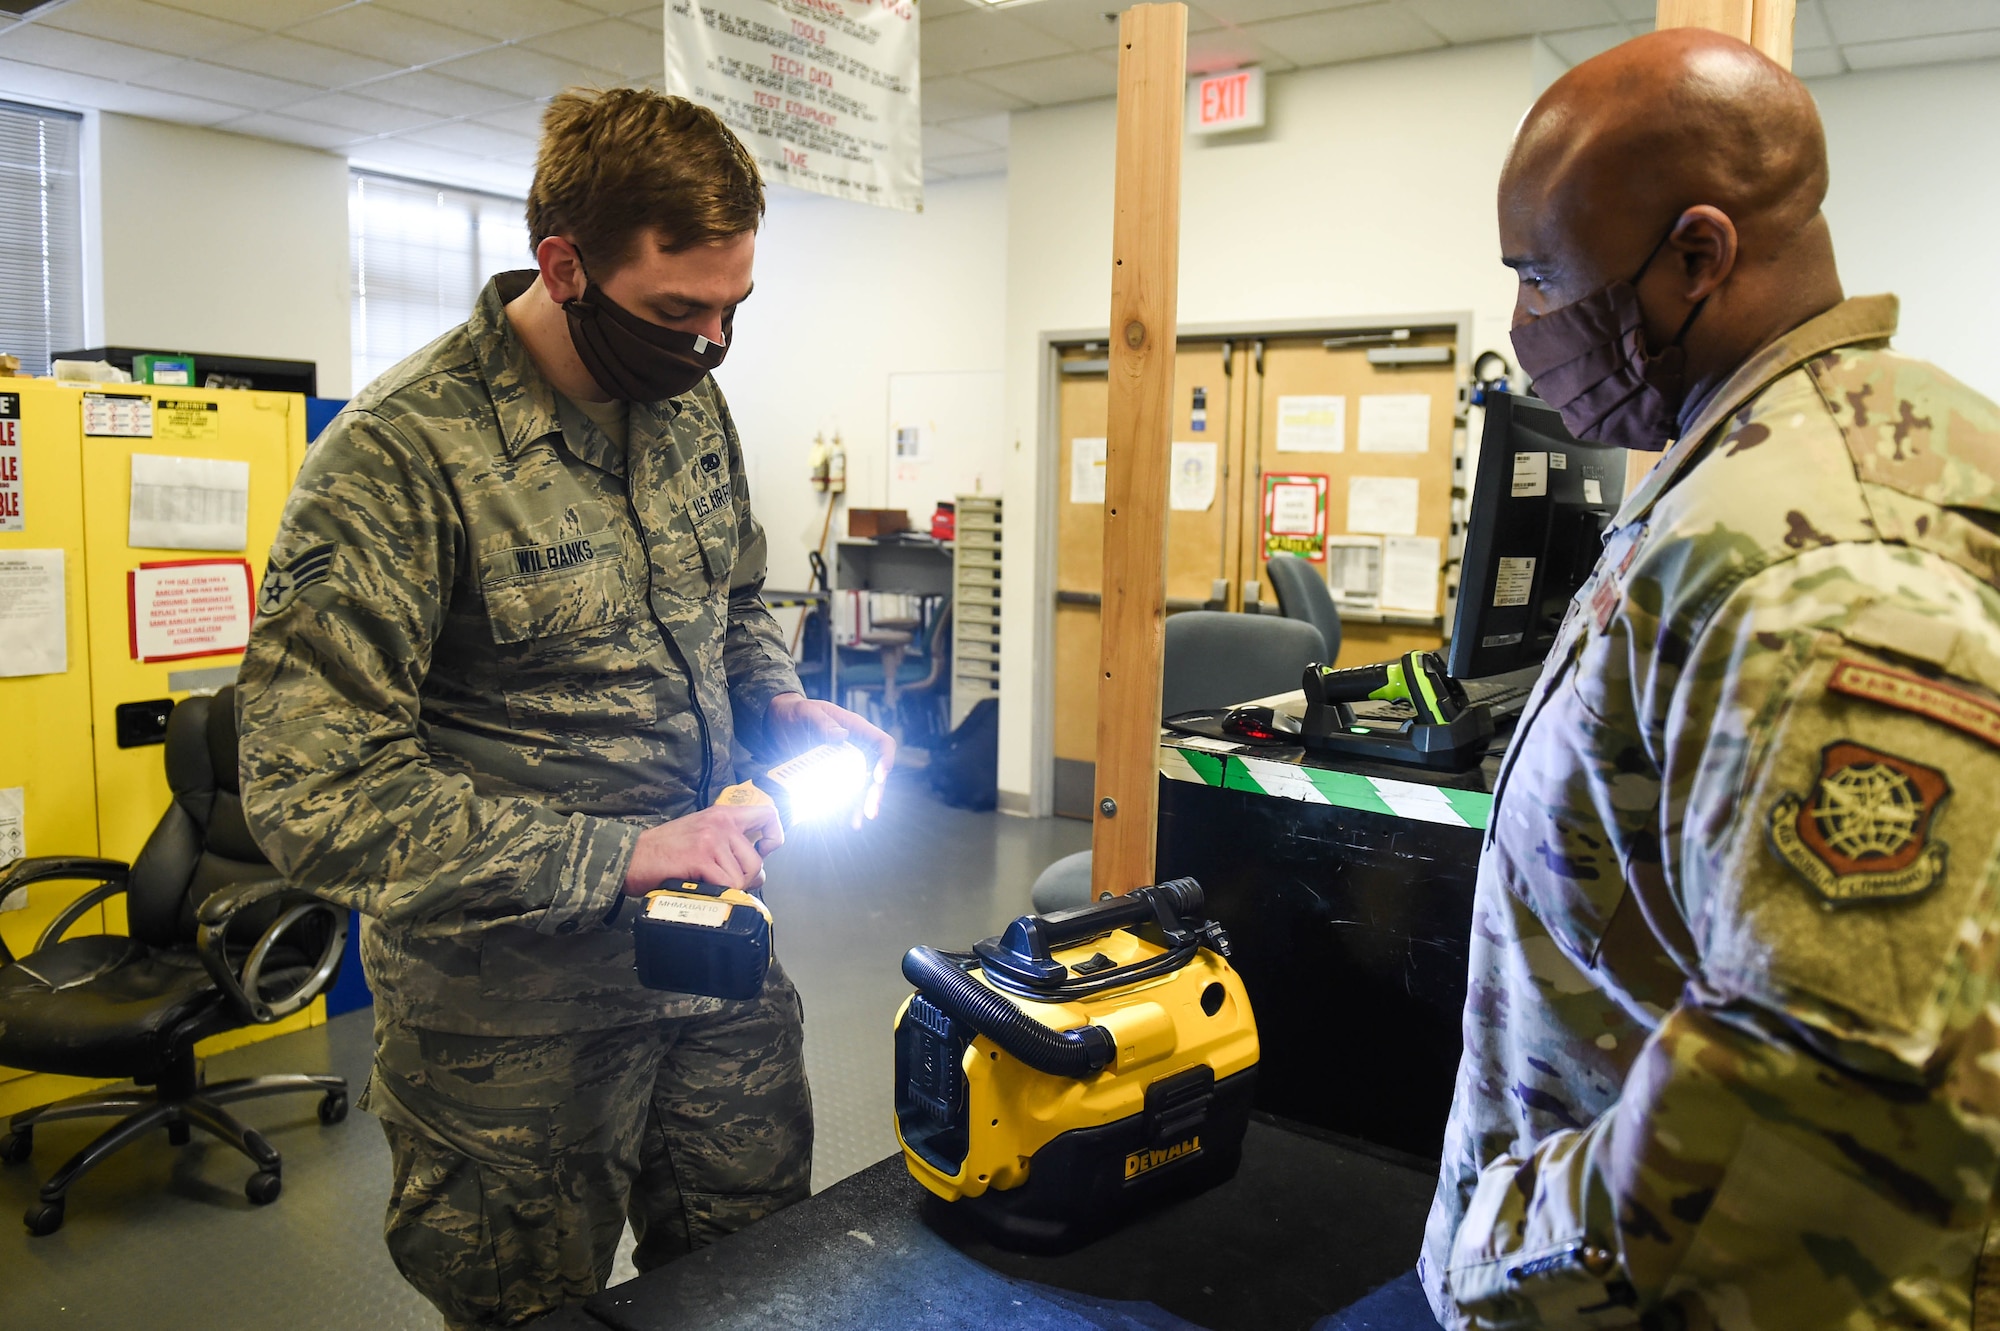 Senior Airman Michael Wilbanks, 62nd Maintenance Squadron support section journeyman, left, tests a flashlight before checking it out to Senior Master Sgt. John Williams, 62nd Mainenance Squadron flight chief, right, inside the home station check support section on Joint Base Lewis-McChord, Wash., May 20, 2020. The support section provides tools and equipment to maintenance personel who work on the aircrafts. (U.S. Air Force photo by Airman 1st Class Mikayla Heineck)